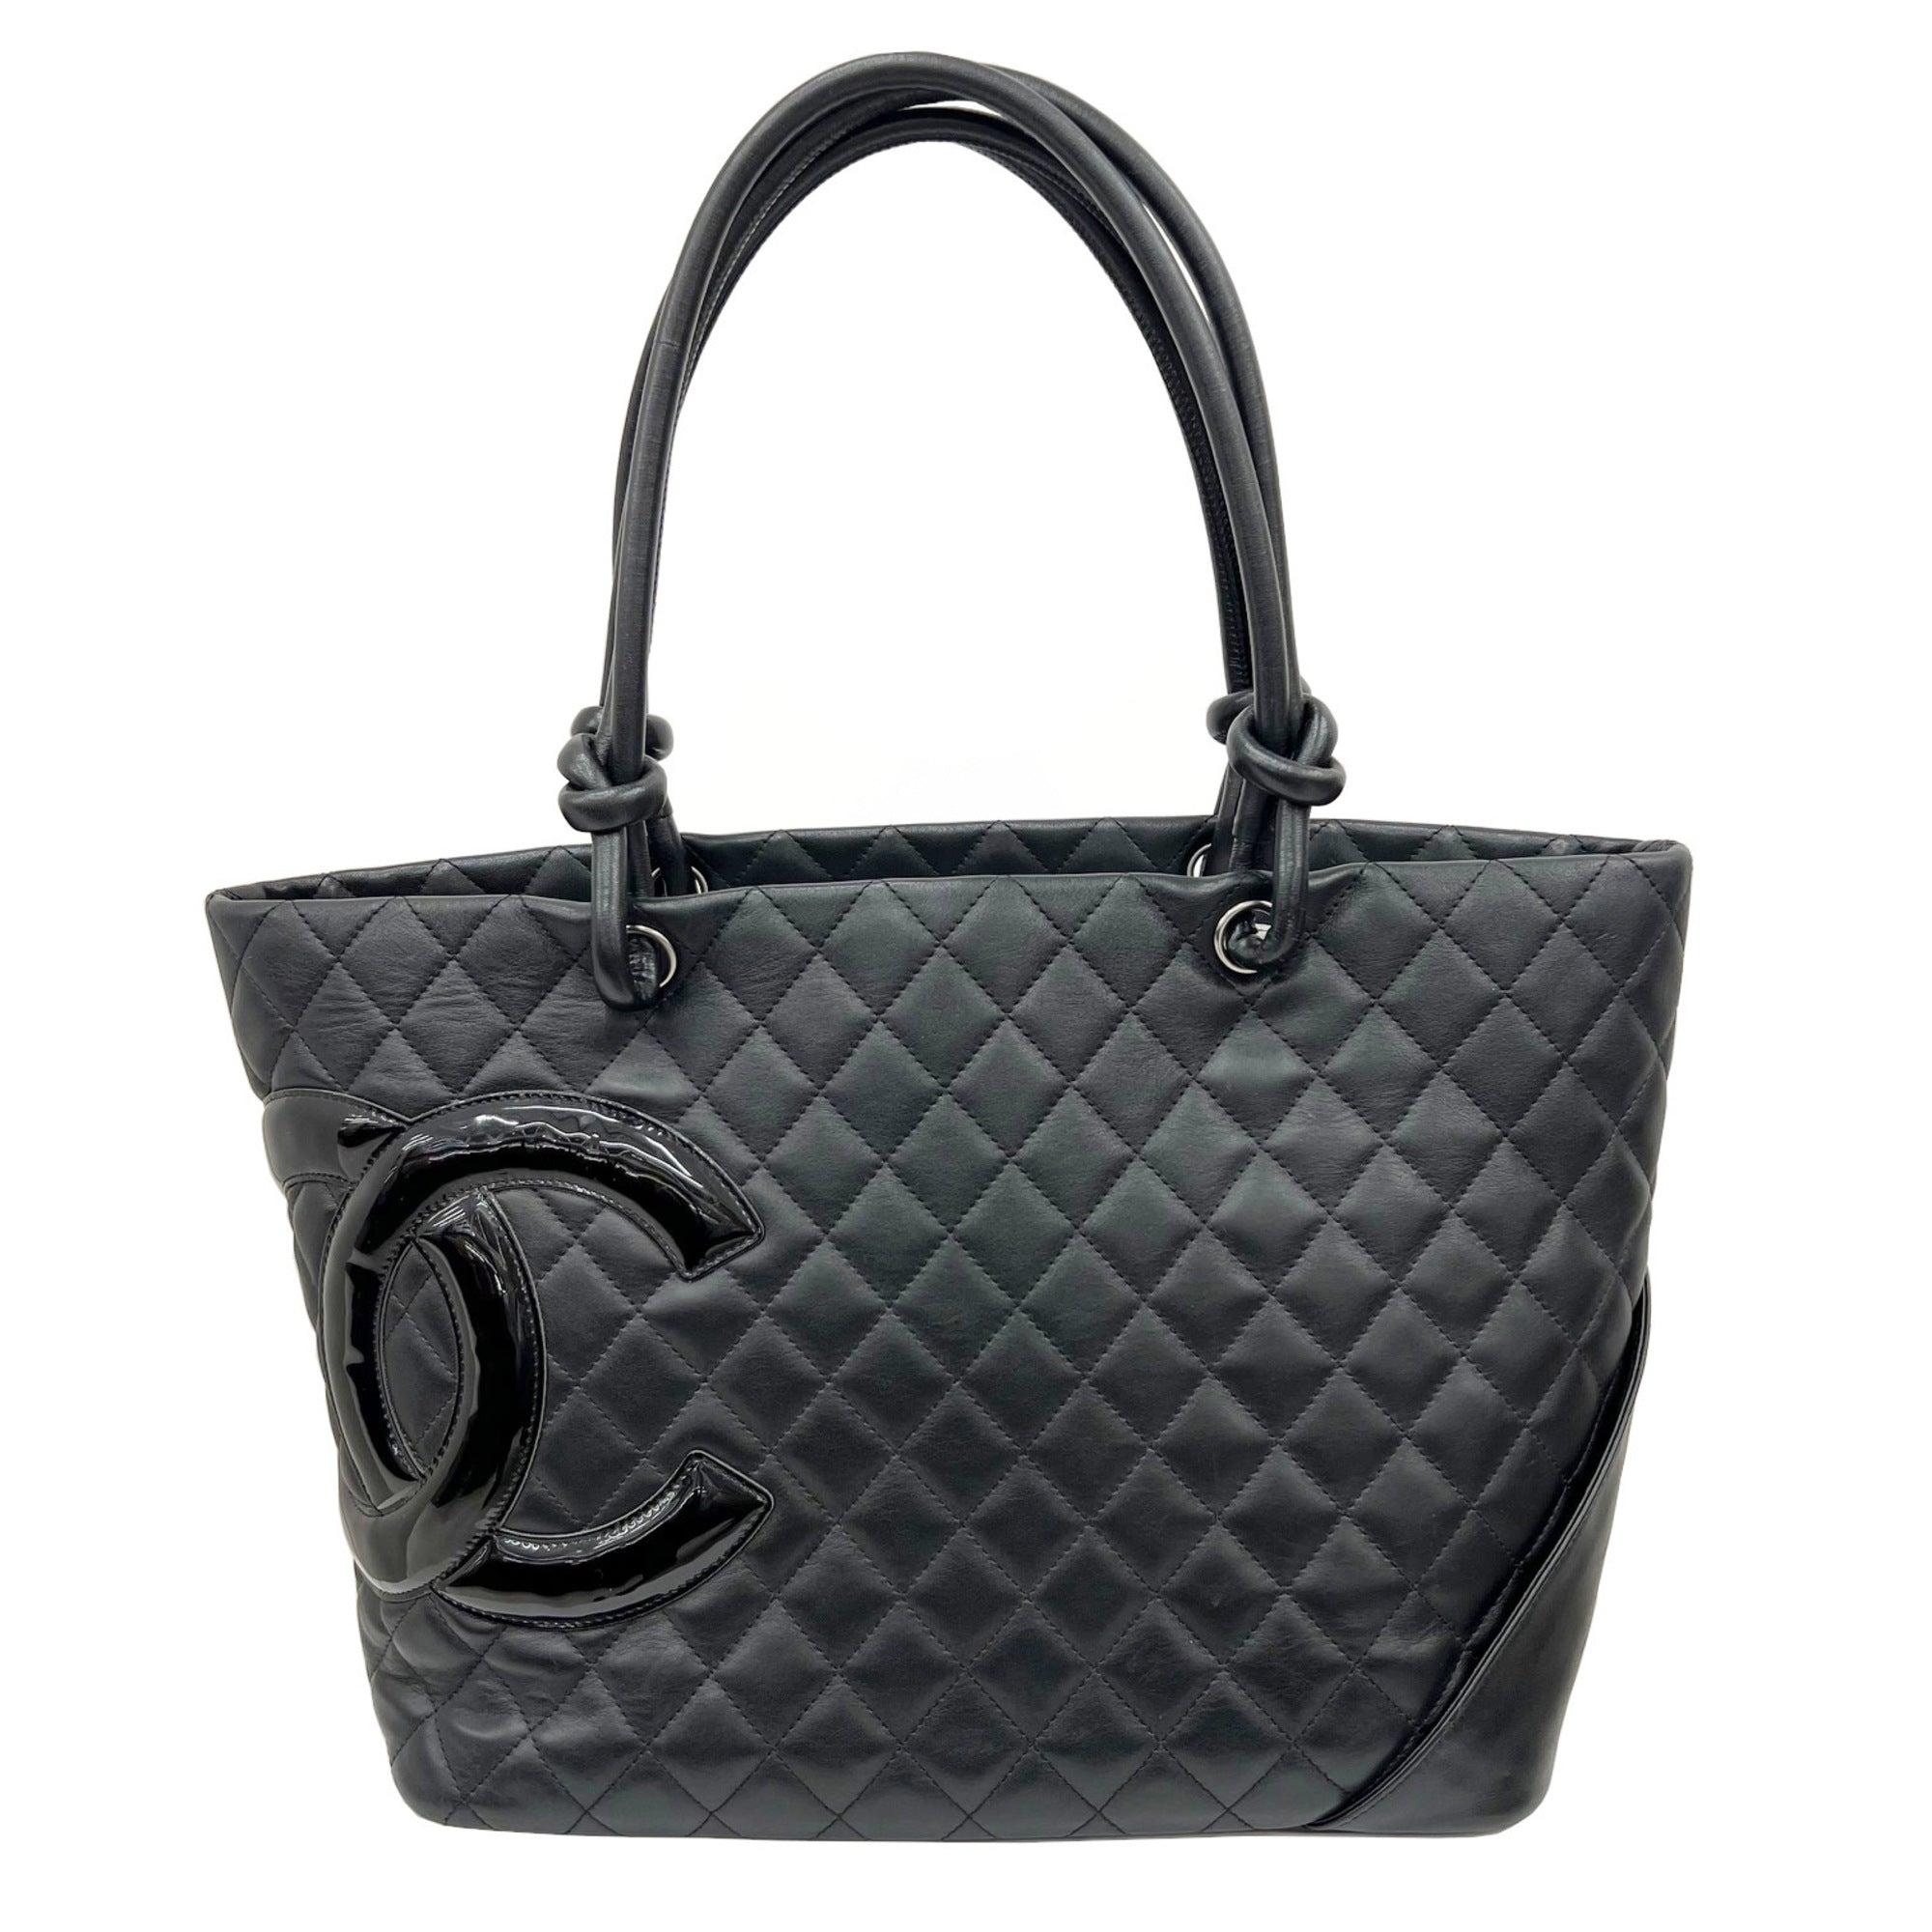 Chanel Camellia Leather Tote Bag (pre-owned) in Black